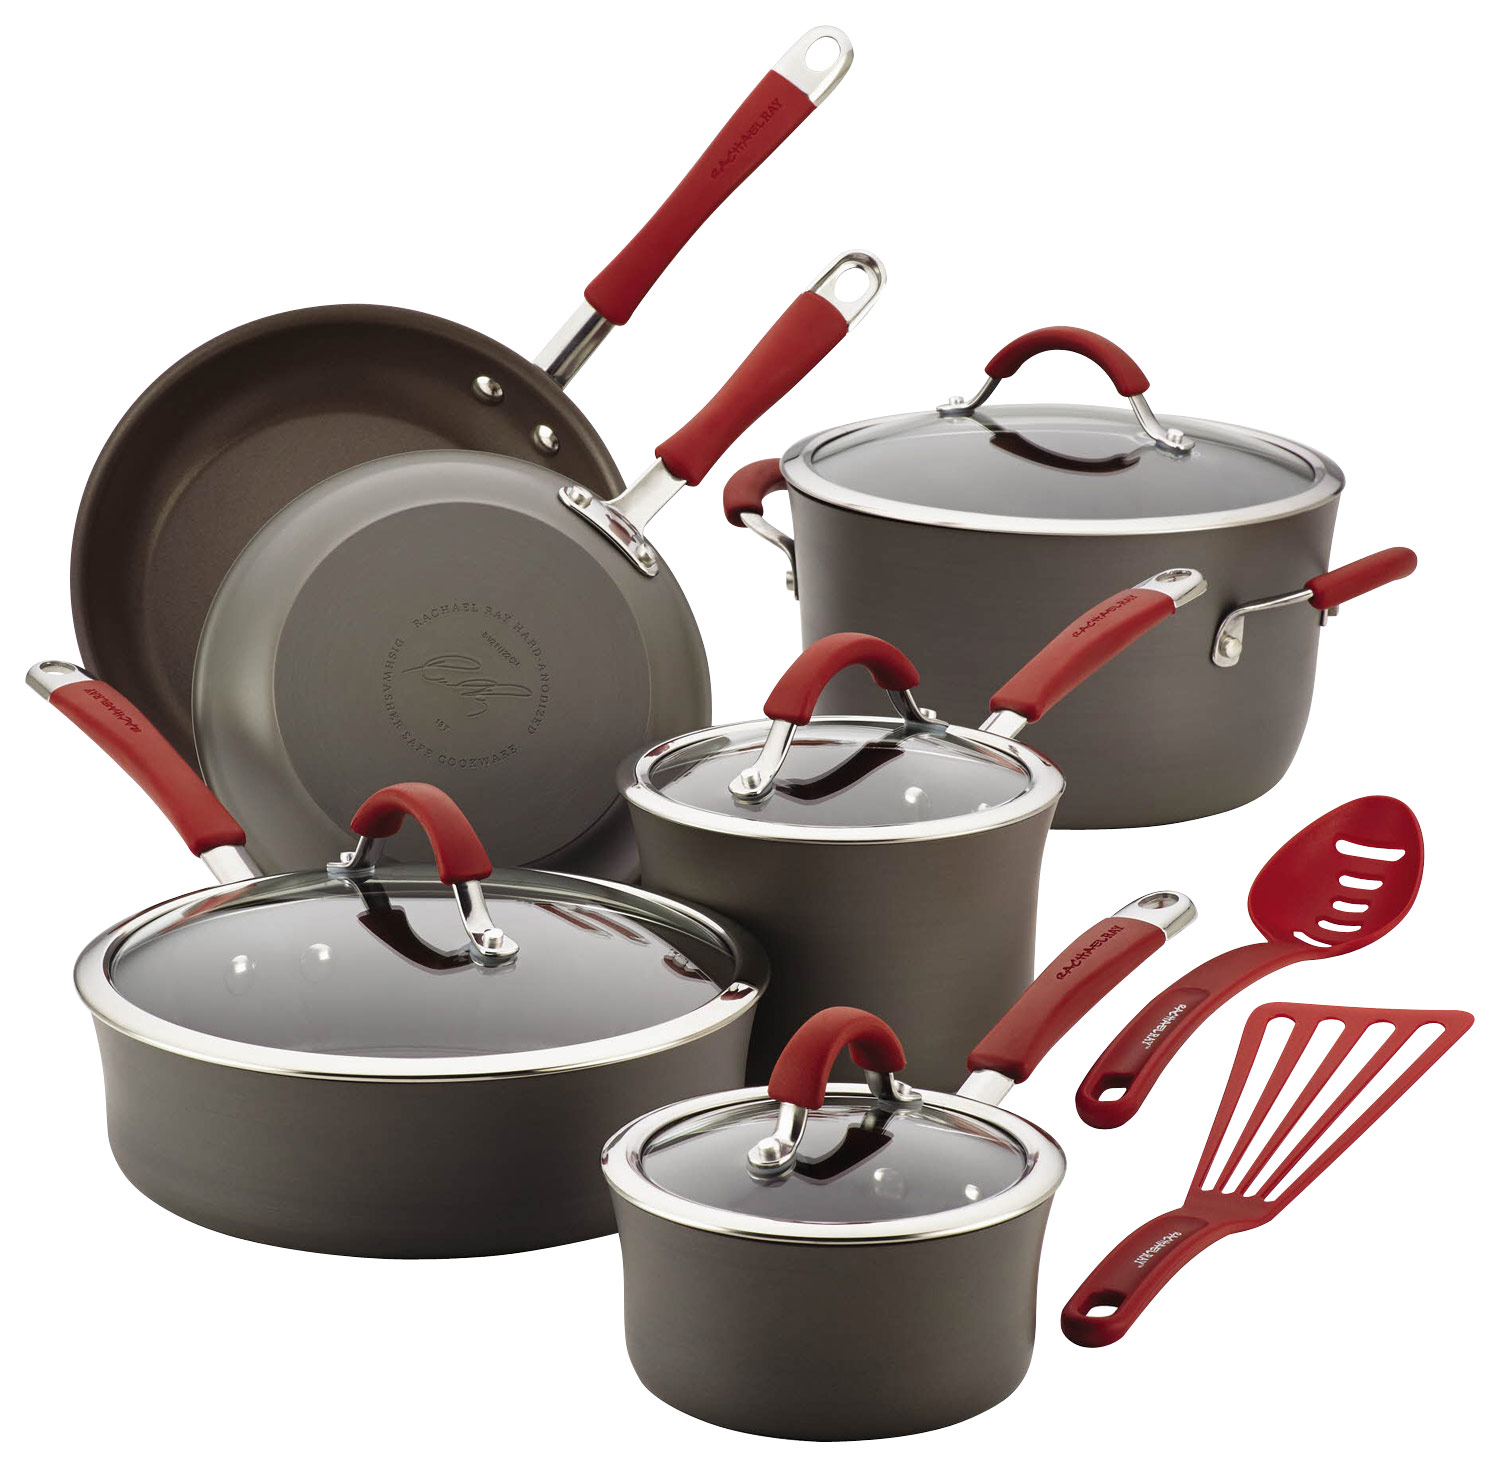 Angle View: Rachael Ray - Cucina 12-Piece Cookware Set - Gray/Cranberry Red